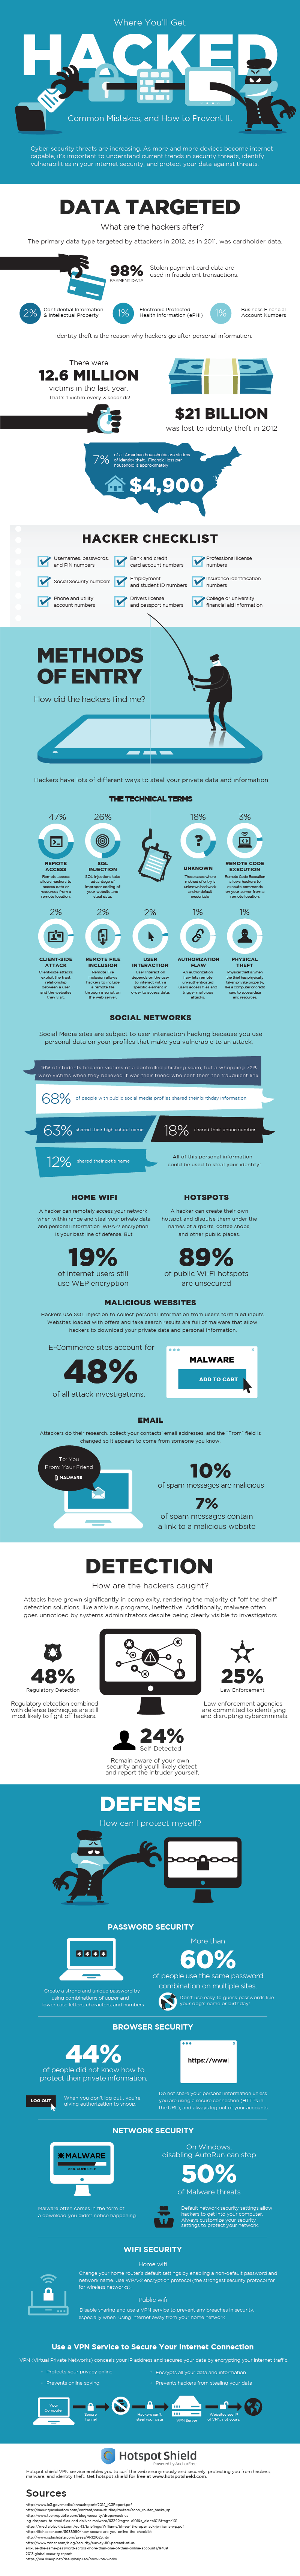 How to protect yourself from hackers infographic